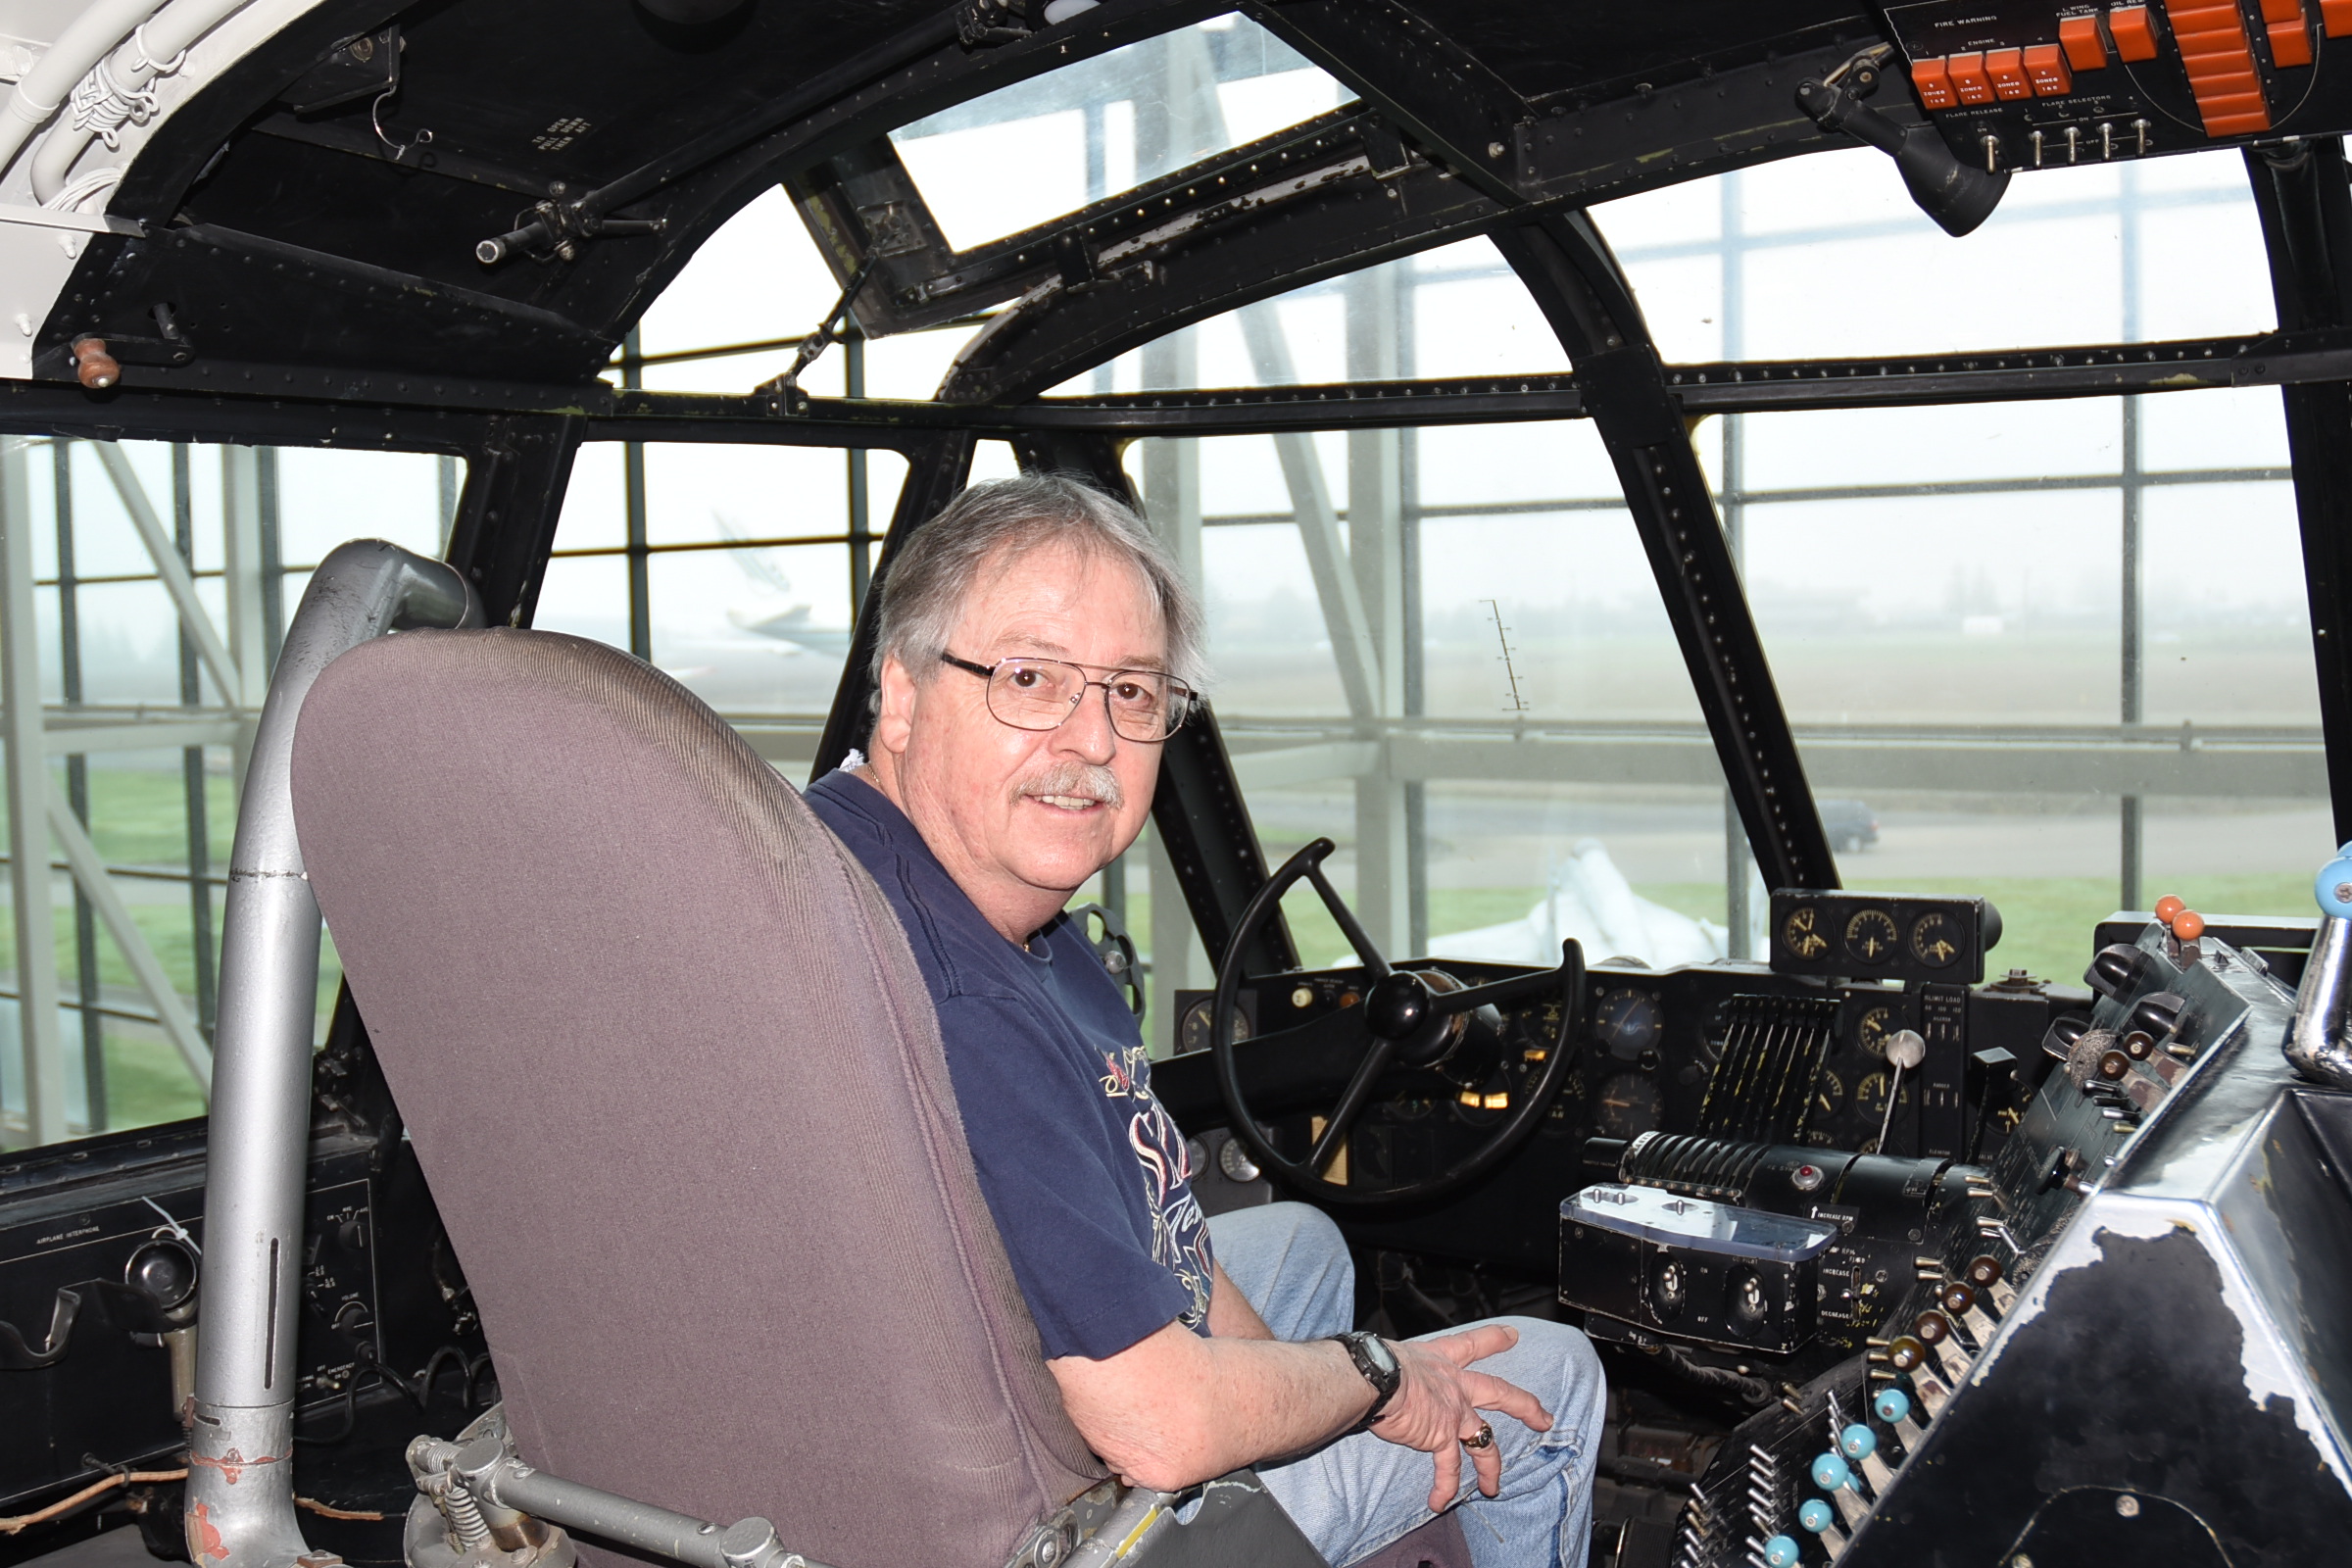 Me in the cockpit of the Spruce Goose